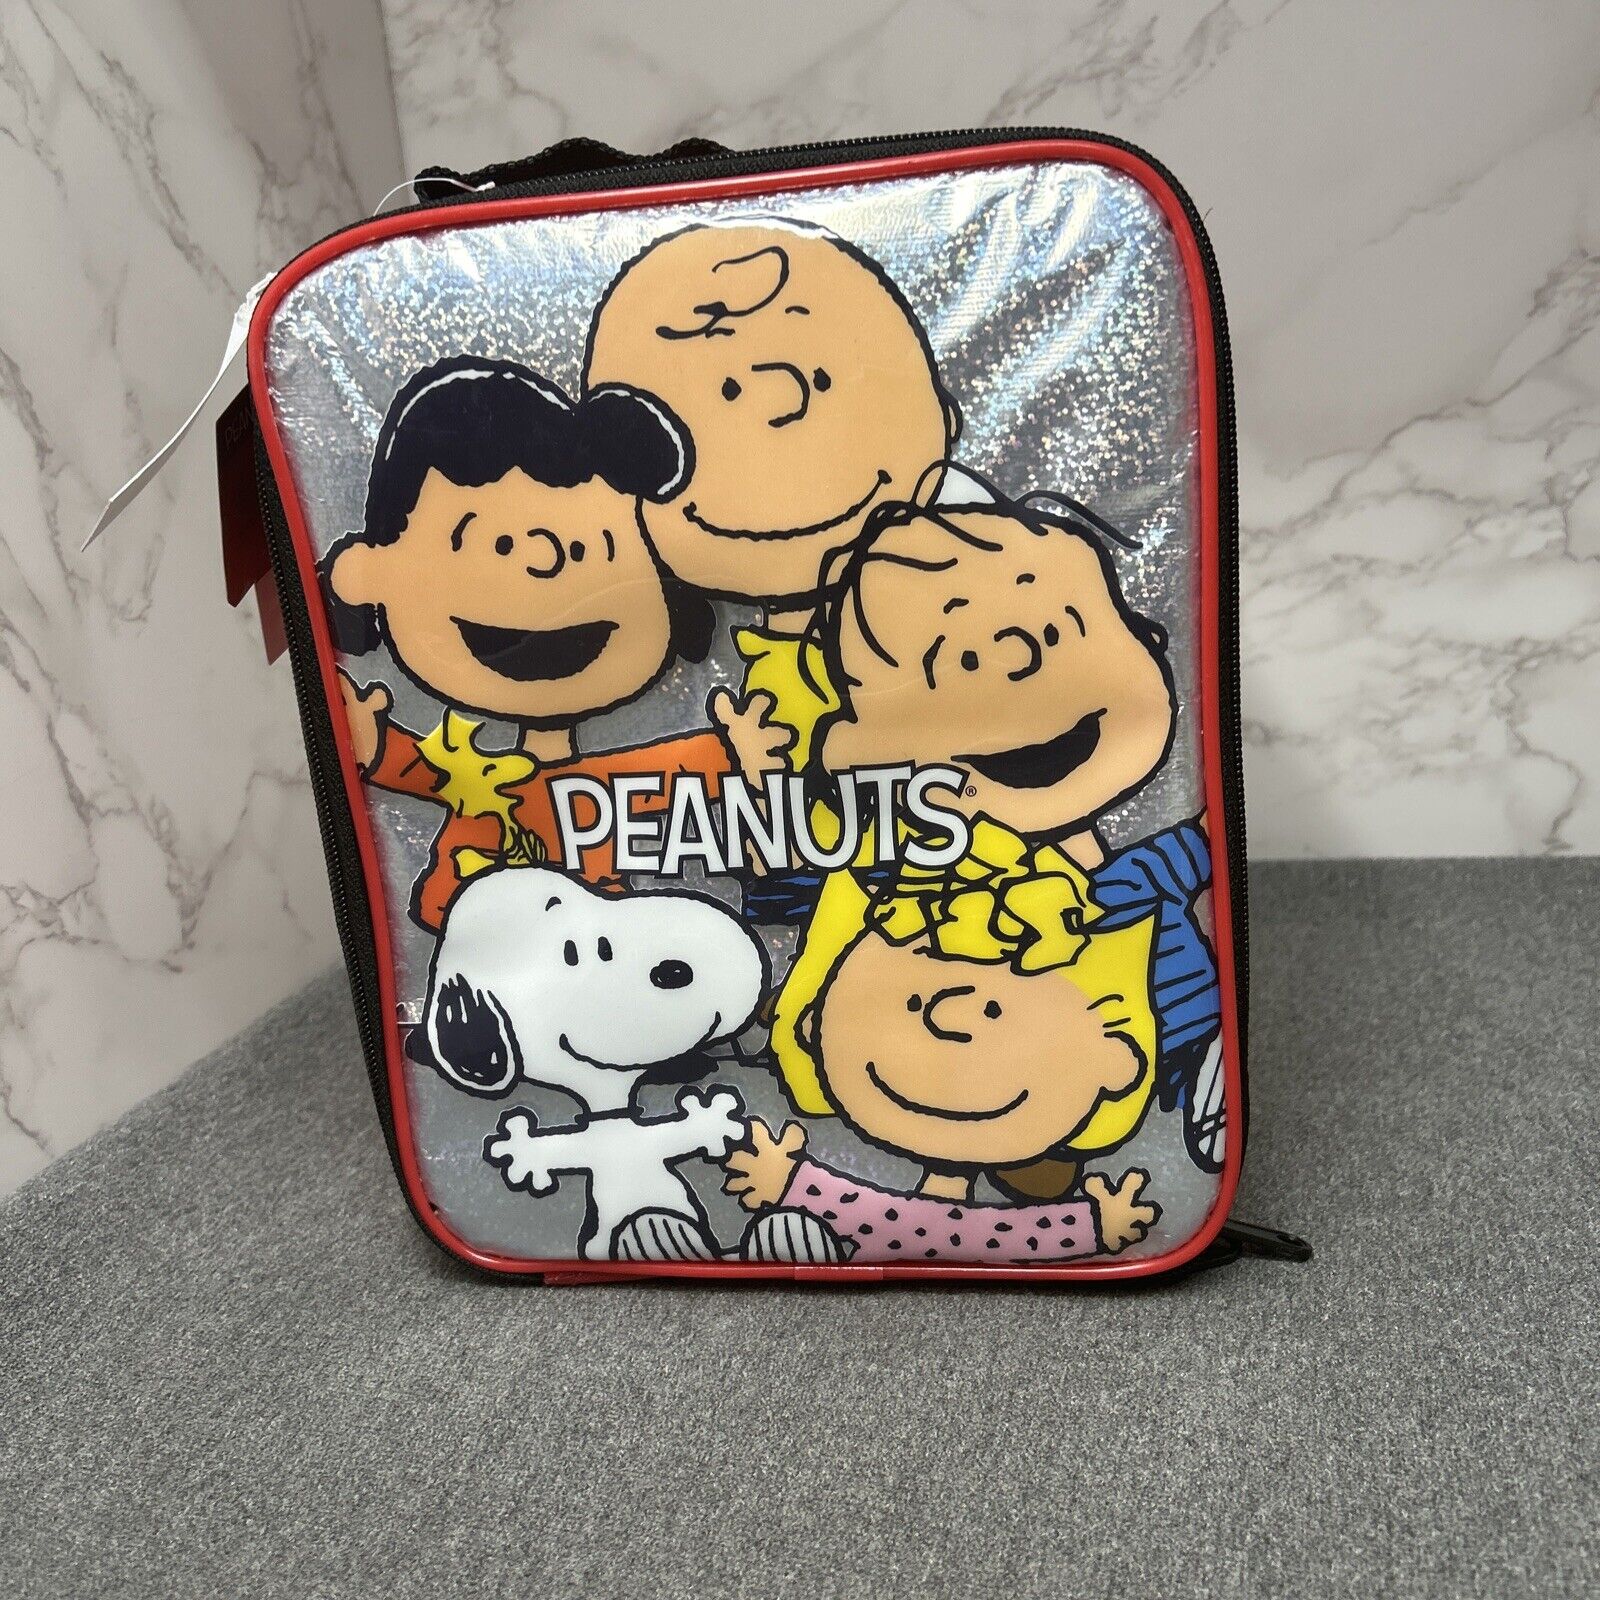 2016 Peanuts Licensed Lunch Bag Kit New With Tags Peanut Snoopy & Gang